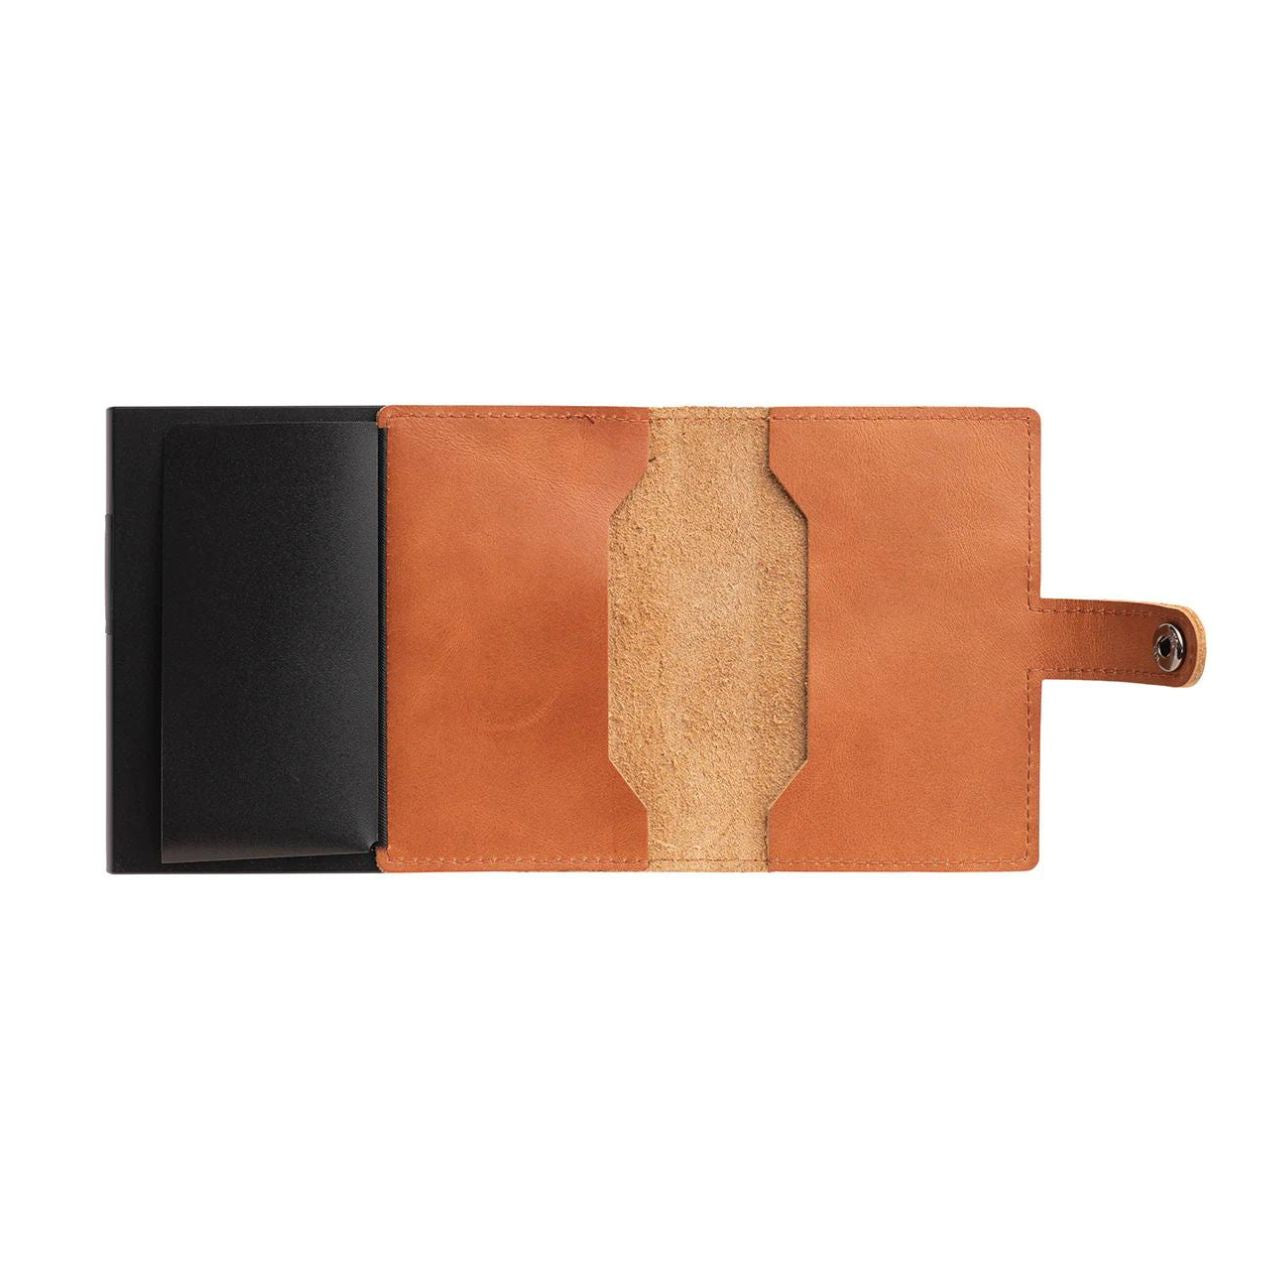 Brown Leather Card Holder Wallet  Keep your cards secure and organised with our Brown Leather Card Holder Wallet. Its compact size fits snugly in your pocket, while the luxurious leather exterior adds a touch of sophistication to your style.